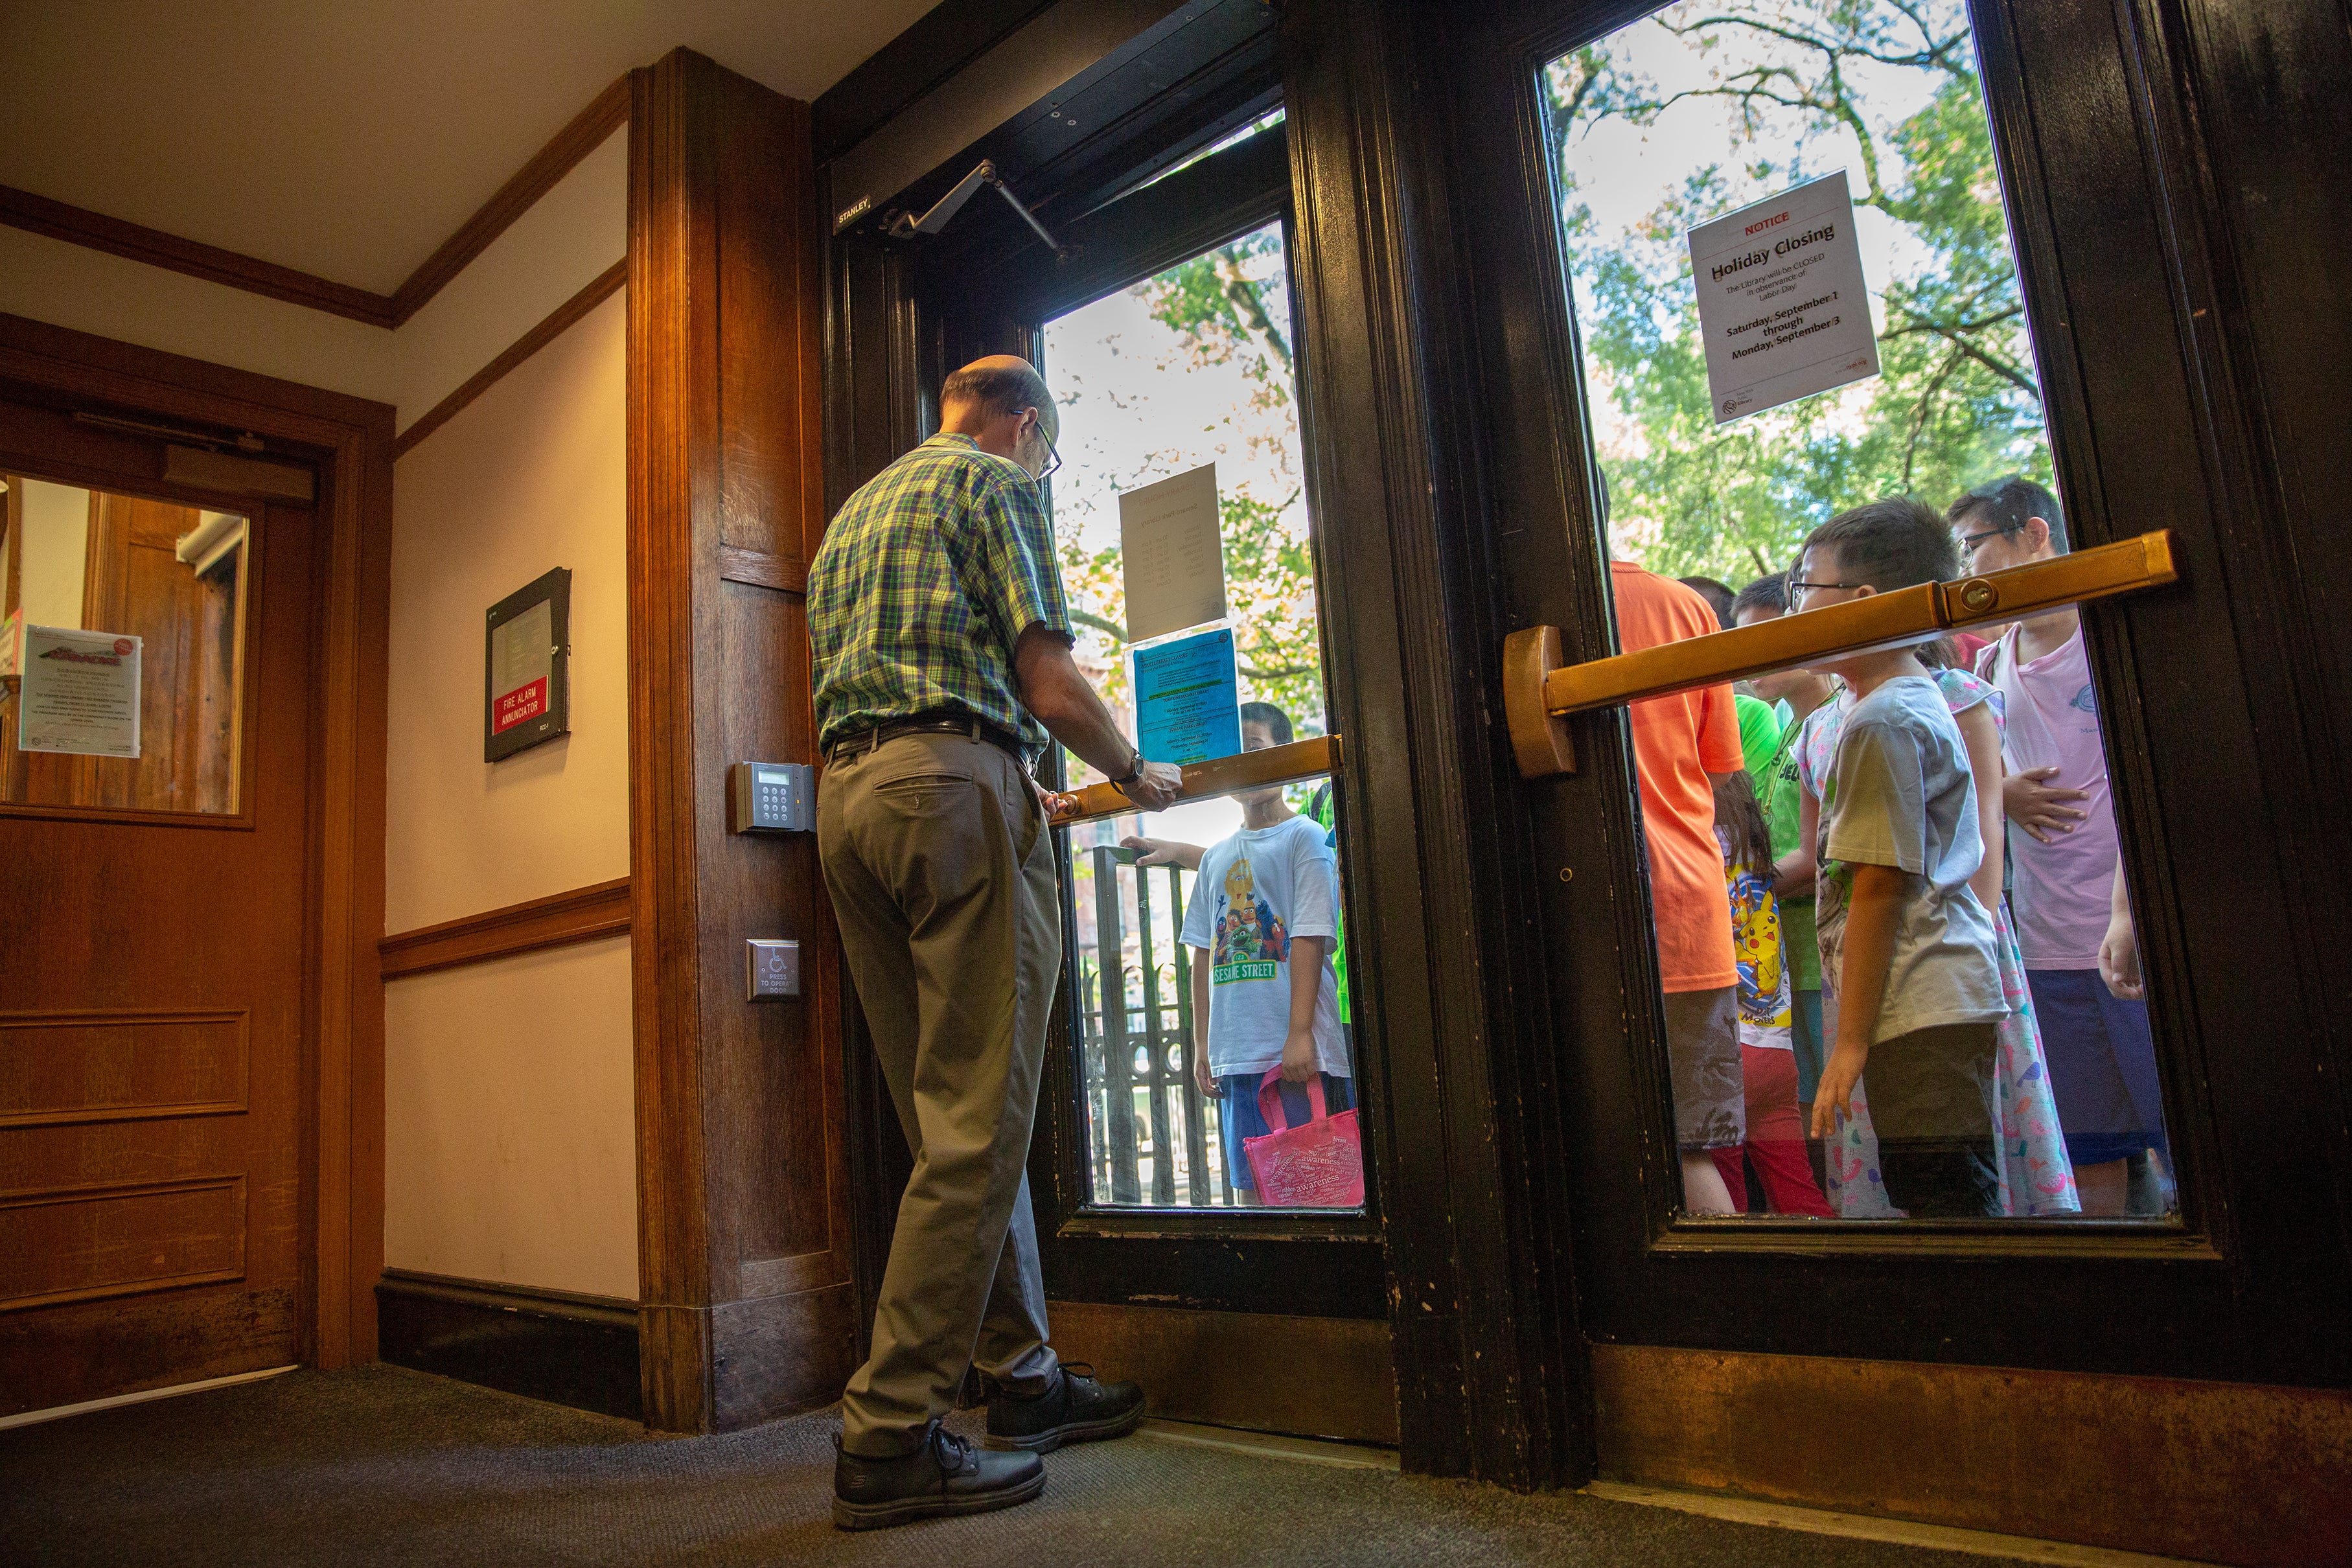 A librarian opens the doors of the library to children waiting outside.